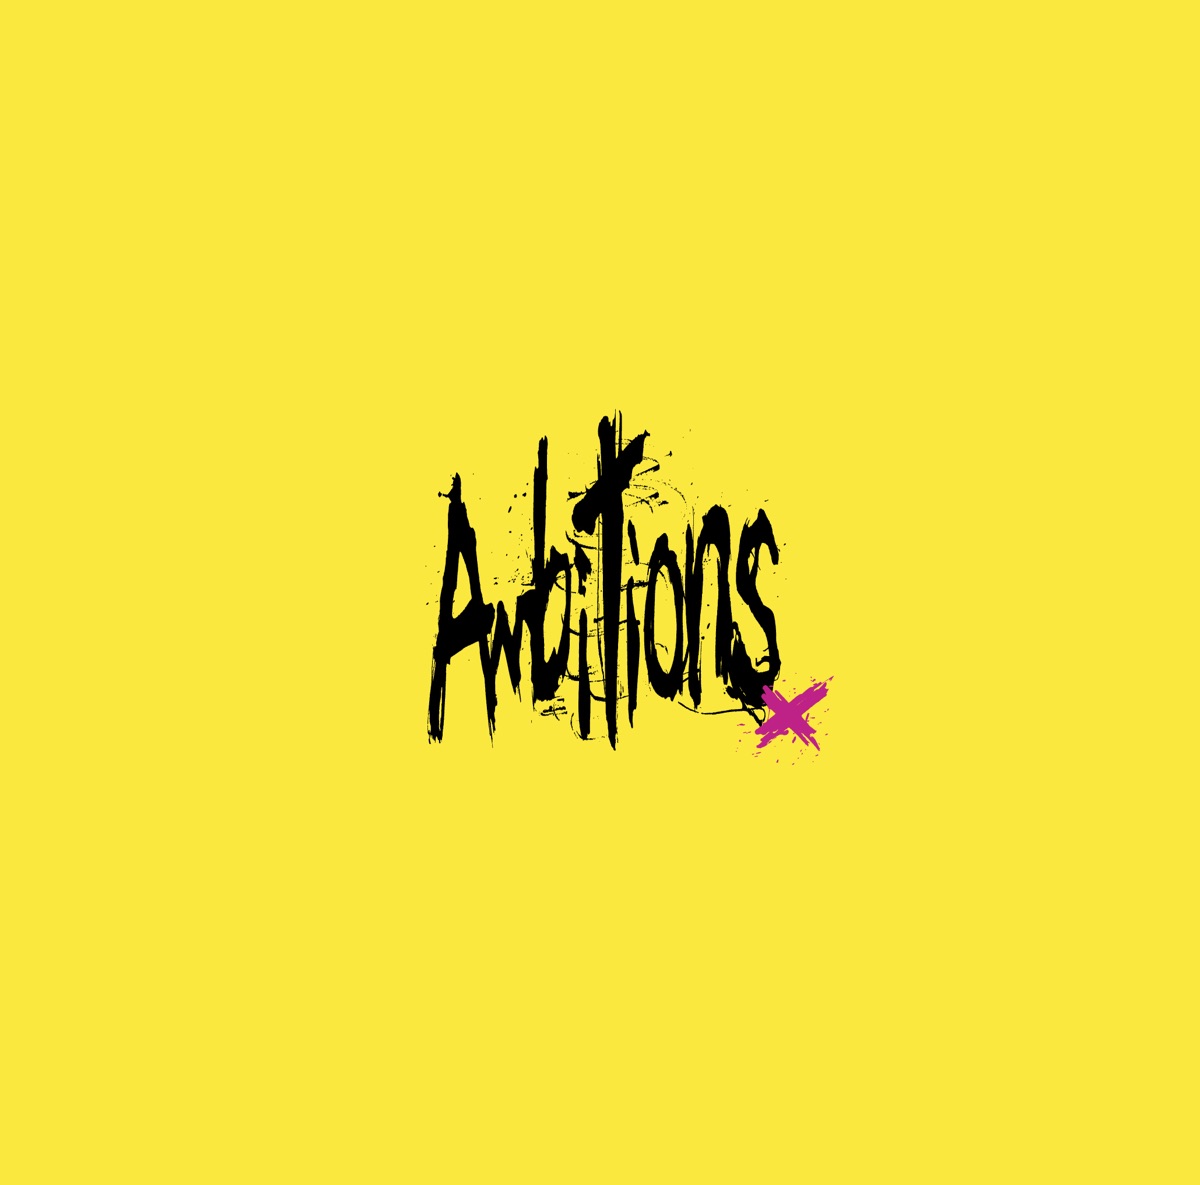 Cover for『ONE OK ROCK - I was King』from the release『Ambitions』